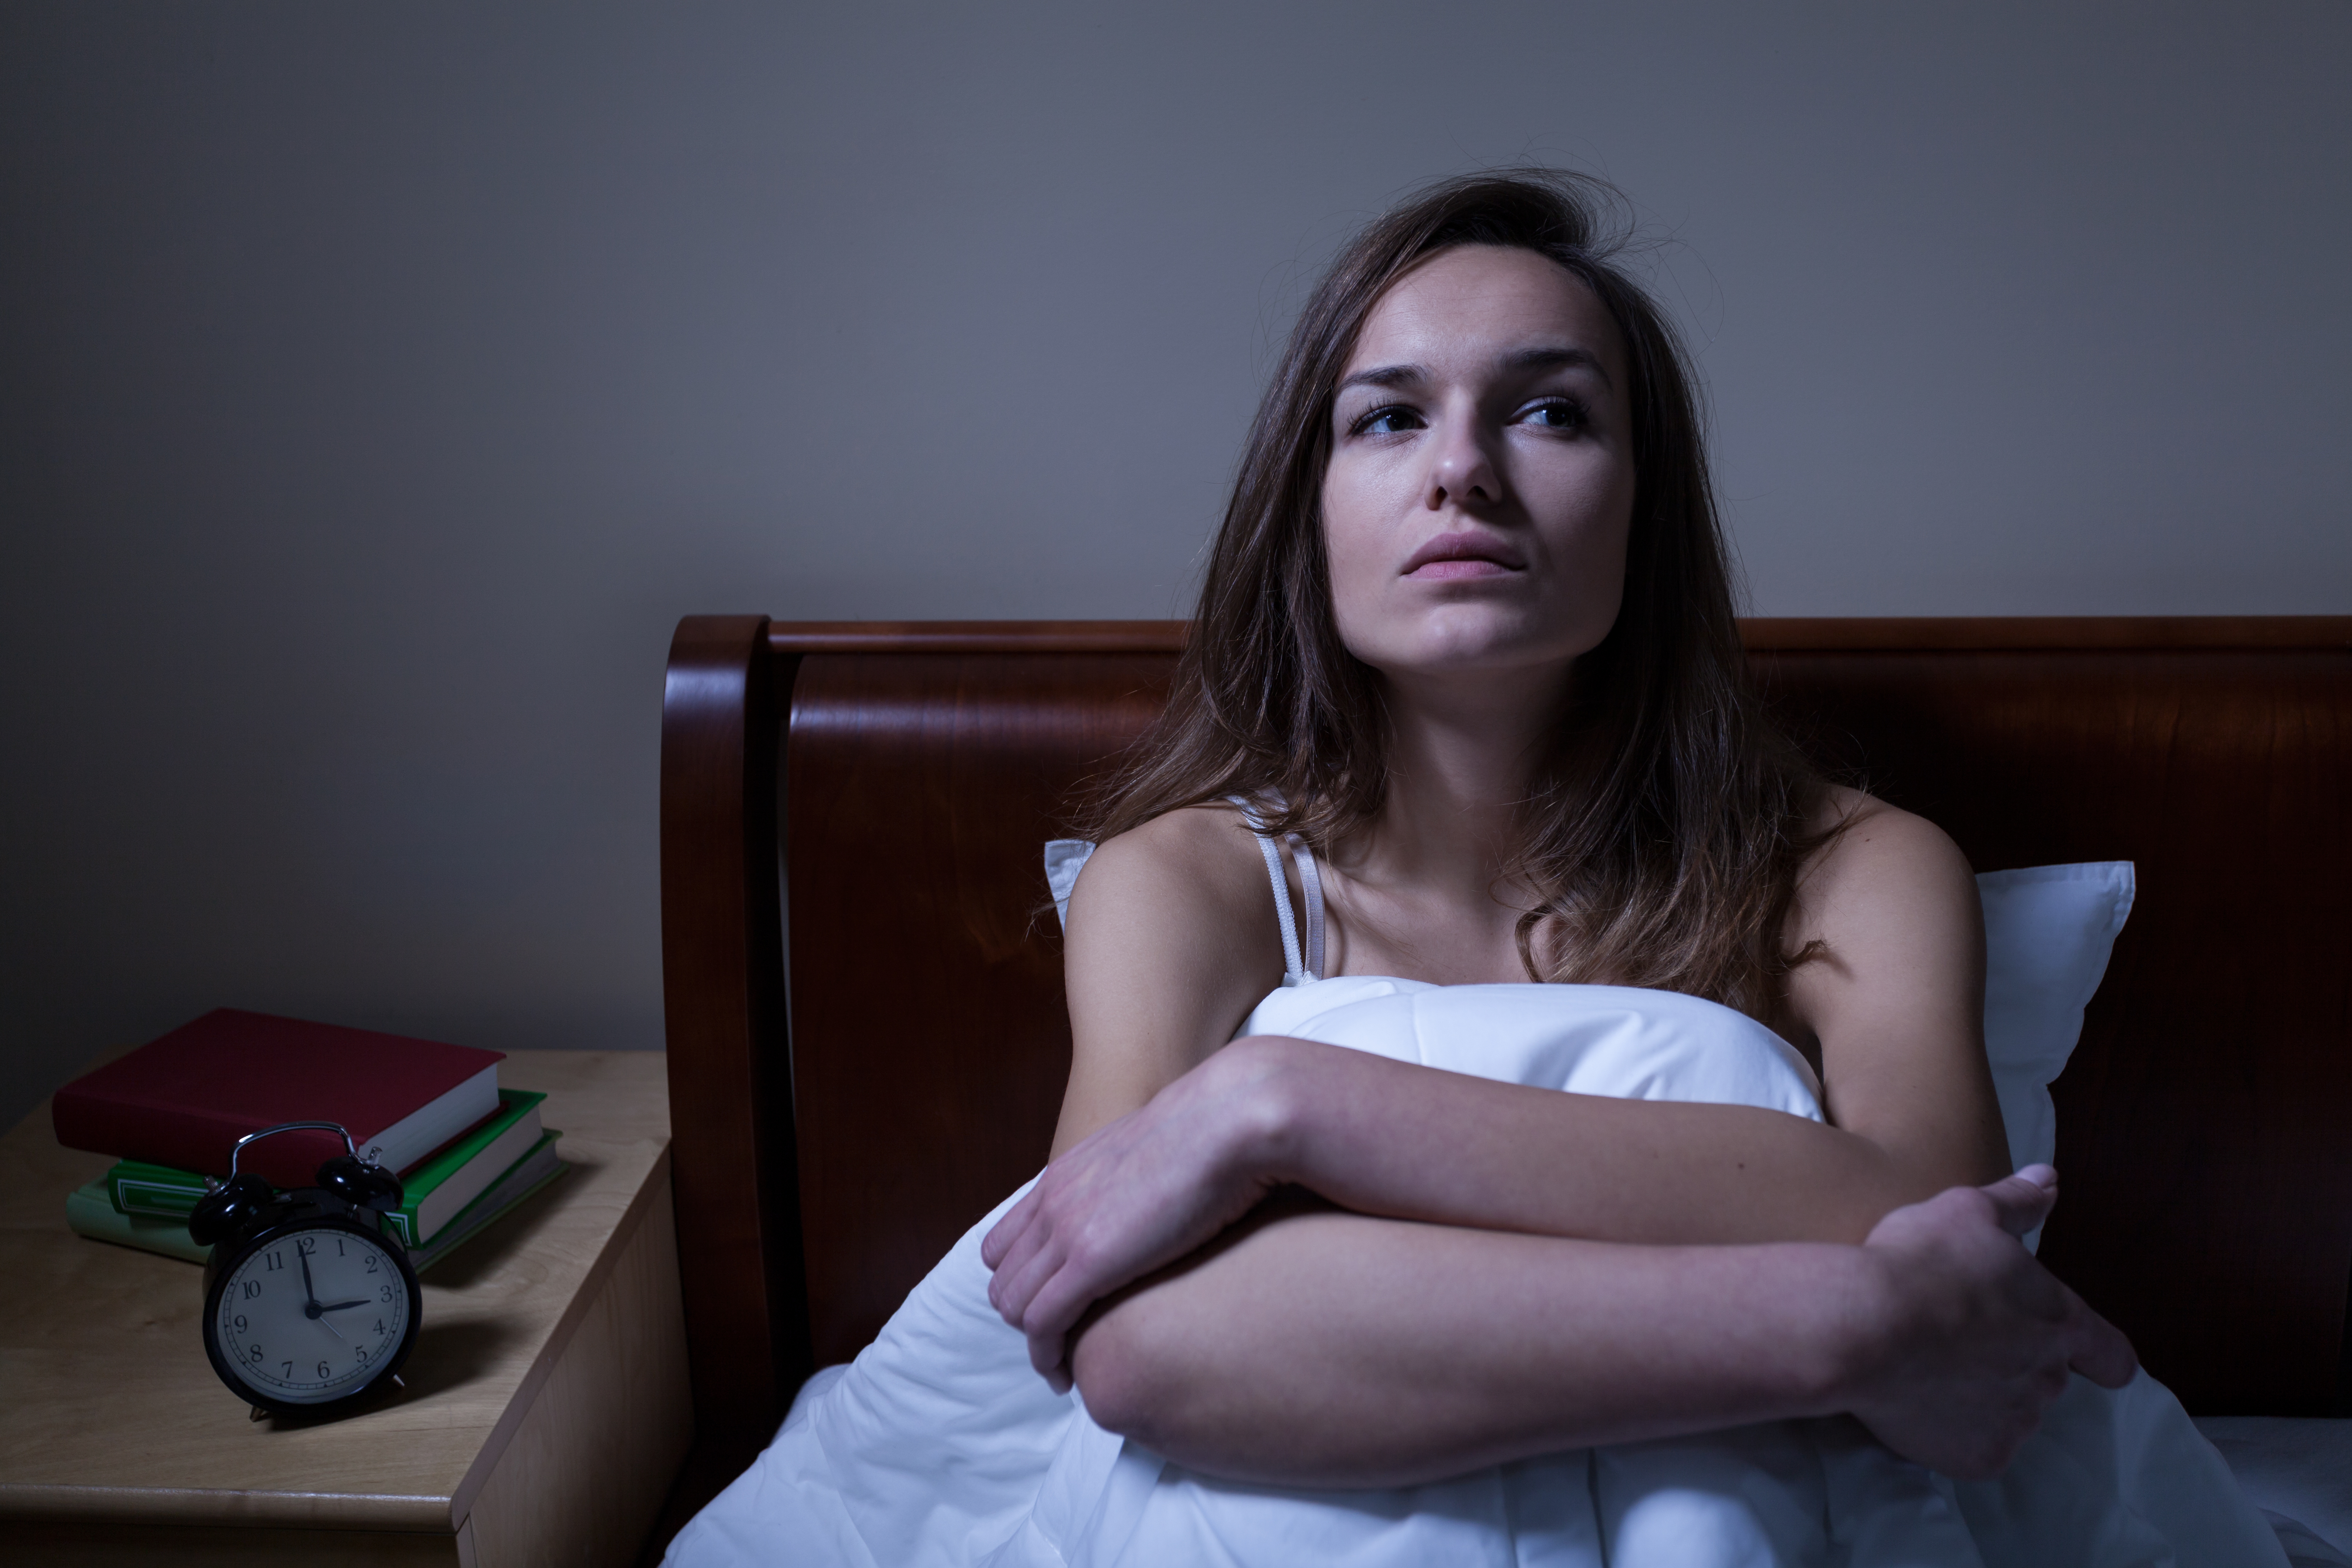 A woman thinking while in bed | Source: Shutterstock